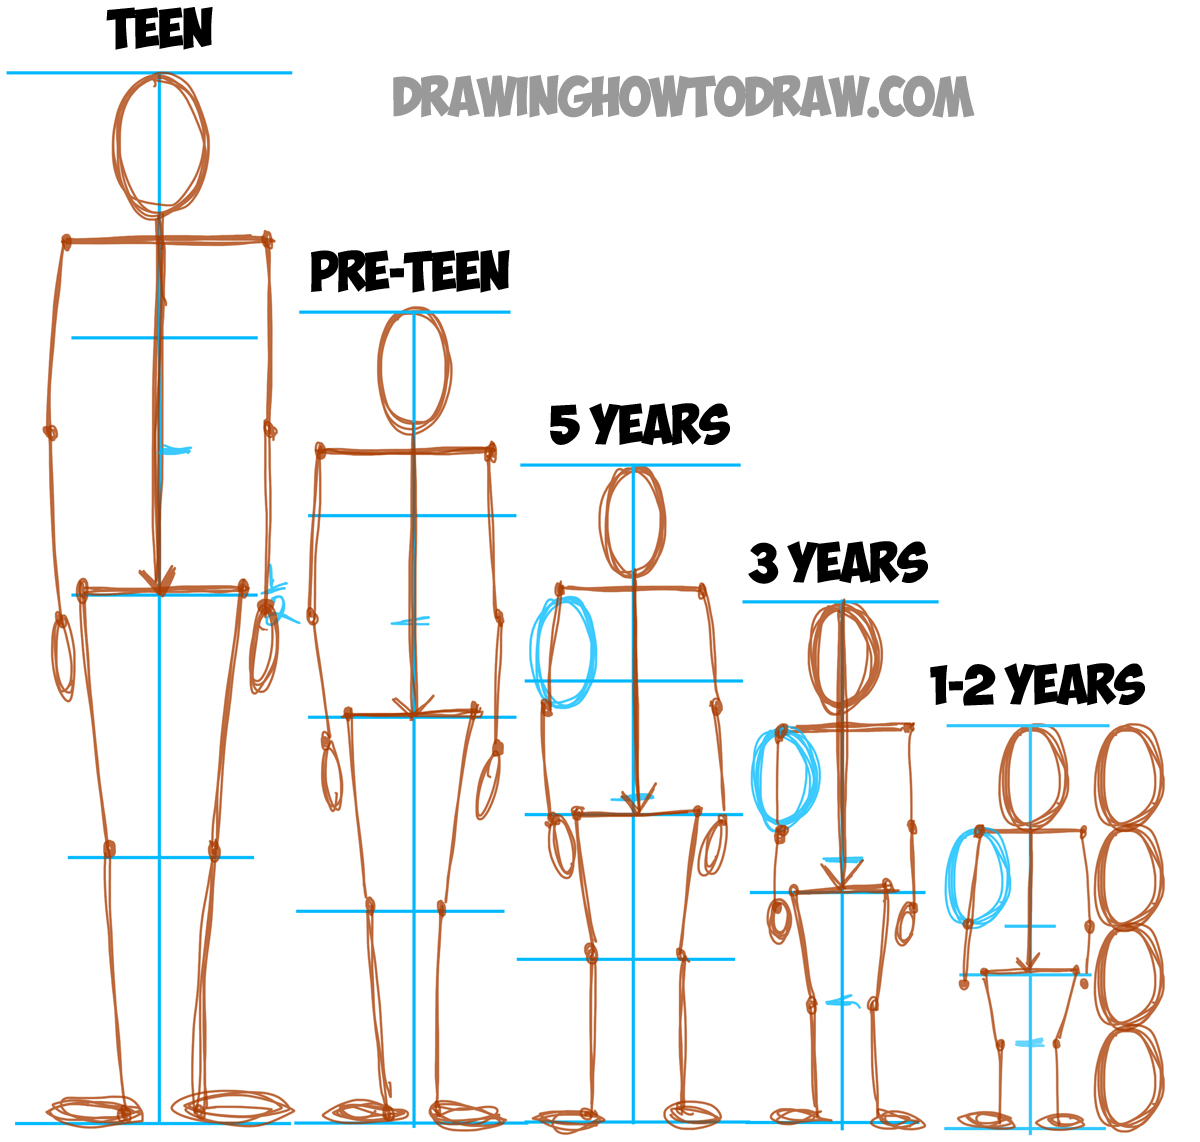 Learn How to Draw Human Figures in Correct Proportions by Memorizing